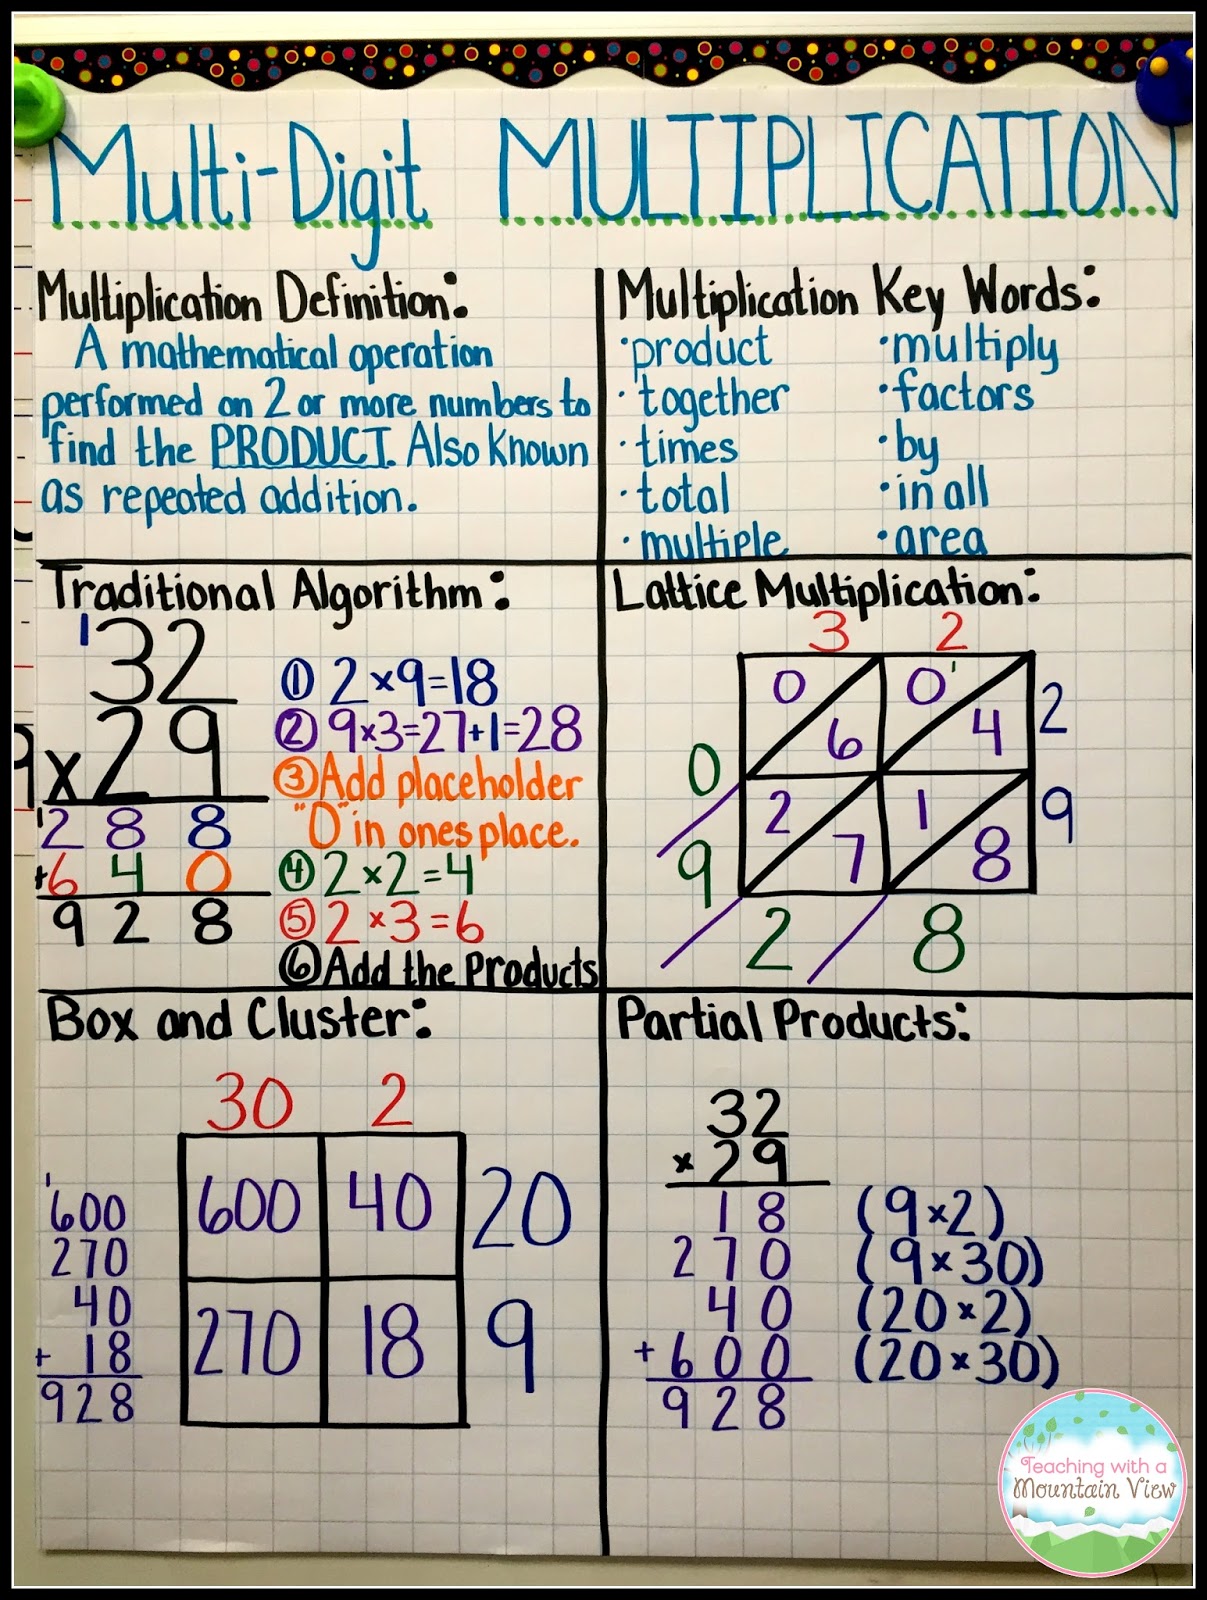 teaching-with-a-mountain-view-multiplication-mastery-madness